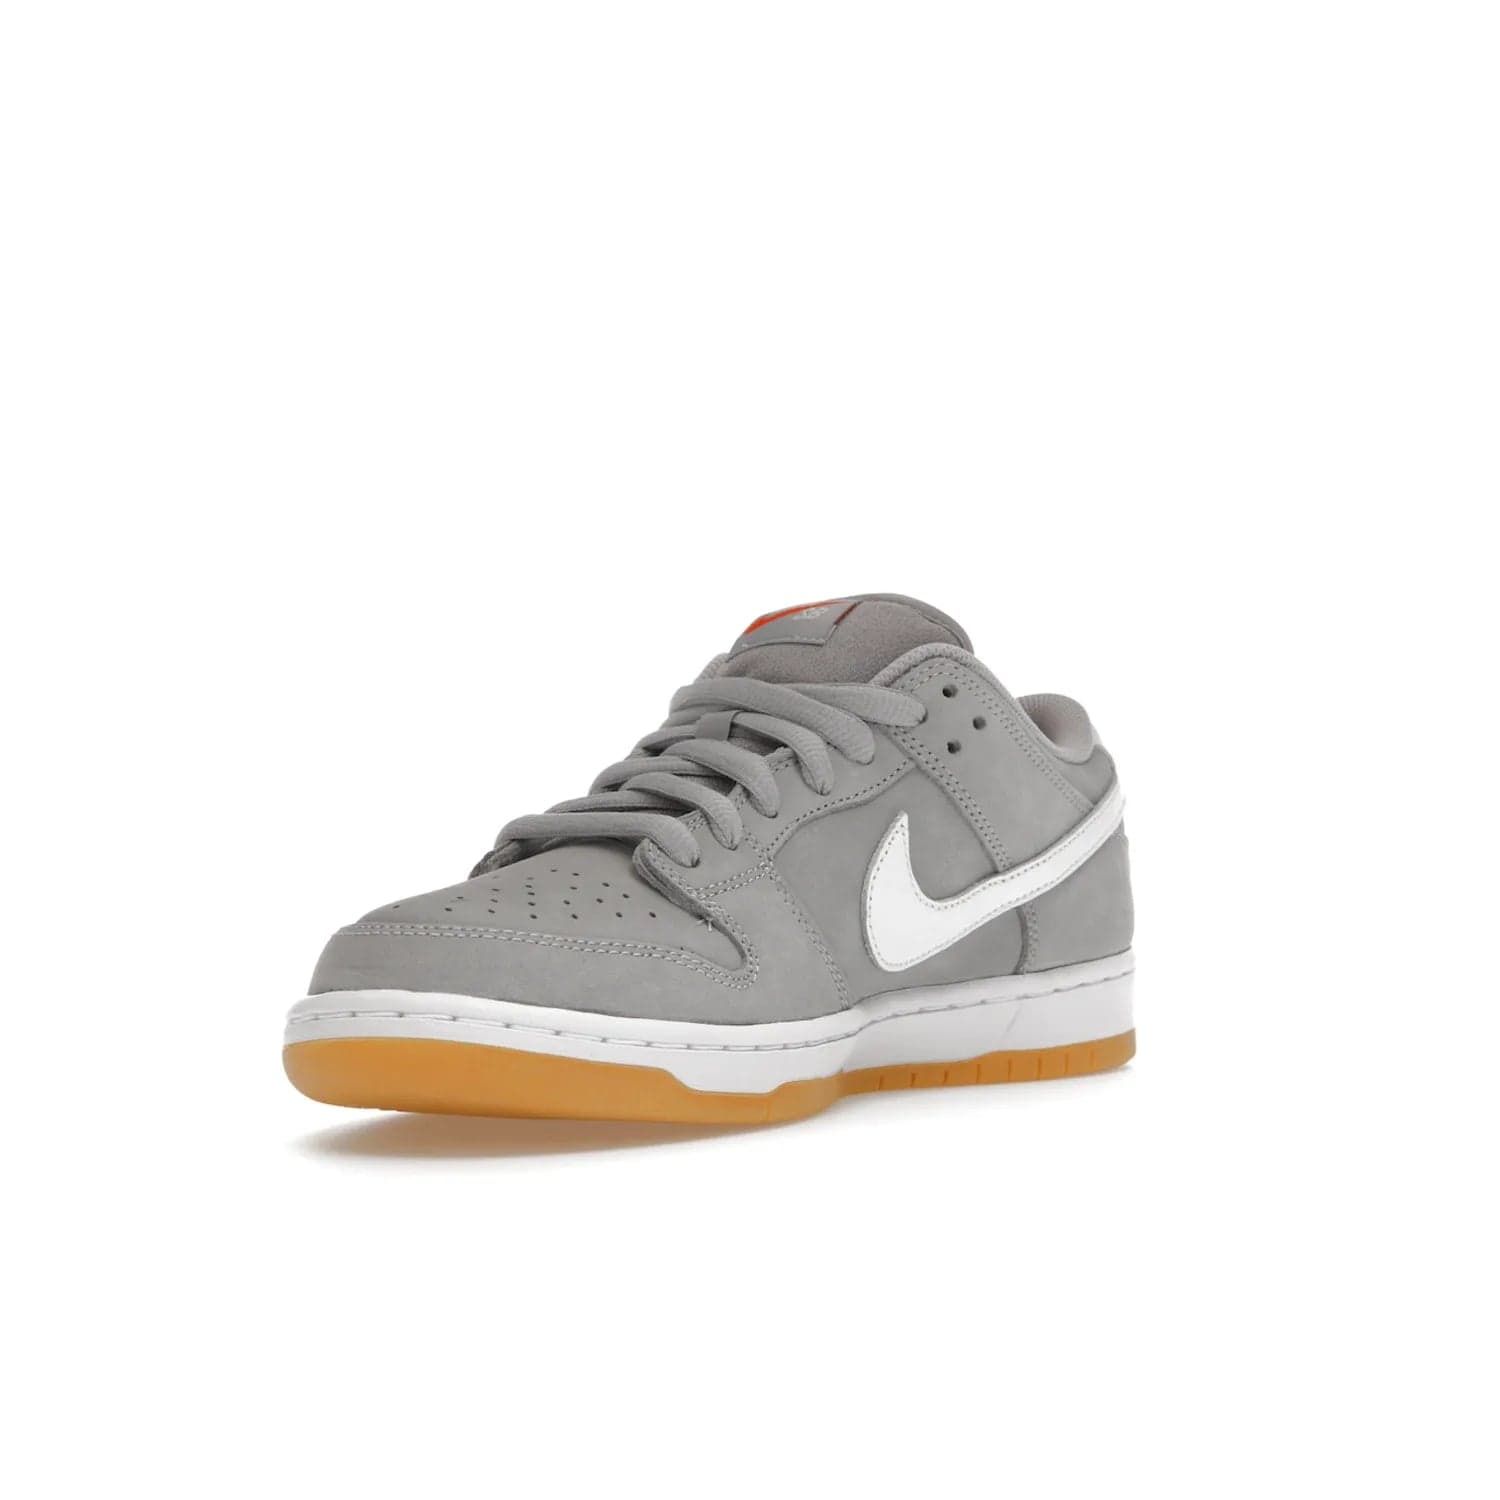 Nike SB Dunk Low Pro ISO Orange Label Wolf Grey Gum - Image 14 - Only at www.BallersClubKickz.com - Introducing Nike's SB Dunk Low Pro ISO Orange Label Wolf Grey Gum - a stylish shoe with a premium Wolf Grey upper, white leather Nike Swoosh, and an eye-catching gum outsole. With special Nike branding and packaging, this shoe adds a unique fashion statement. Out Feb. 24, 2023.